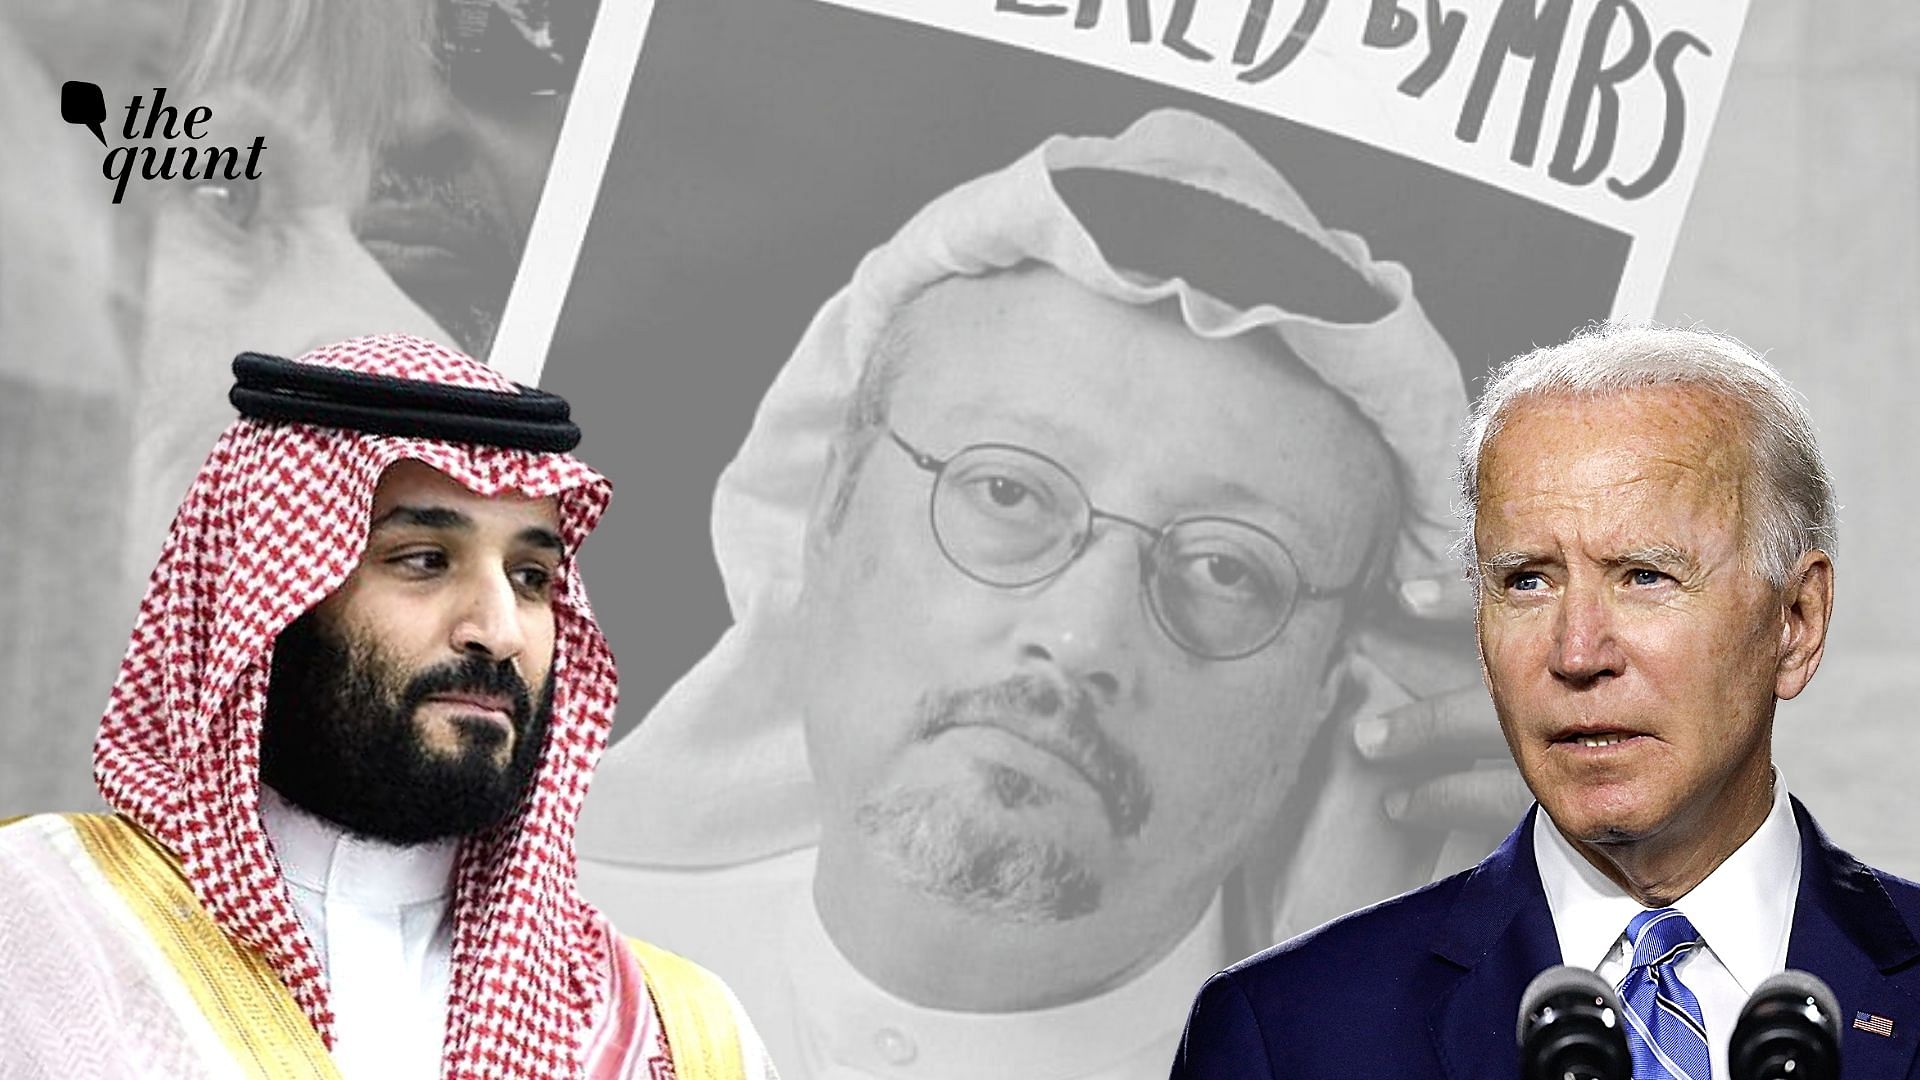 After the disclosure of a detailed intelligence report tying journalist Jamal Khashoggi’s brutal murder to Saudi Arabia’s Crown Prince Mohammed bin Salman, US president Joe Biden and his administration have been subject to the watchful eye of human rights organisations as well as some democrats in Congress.